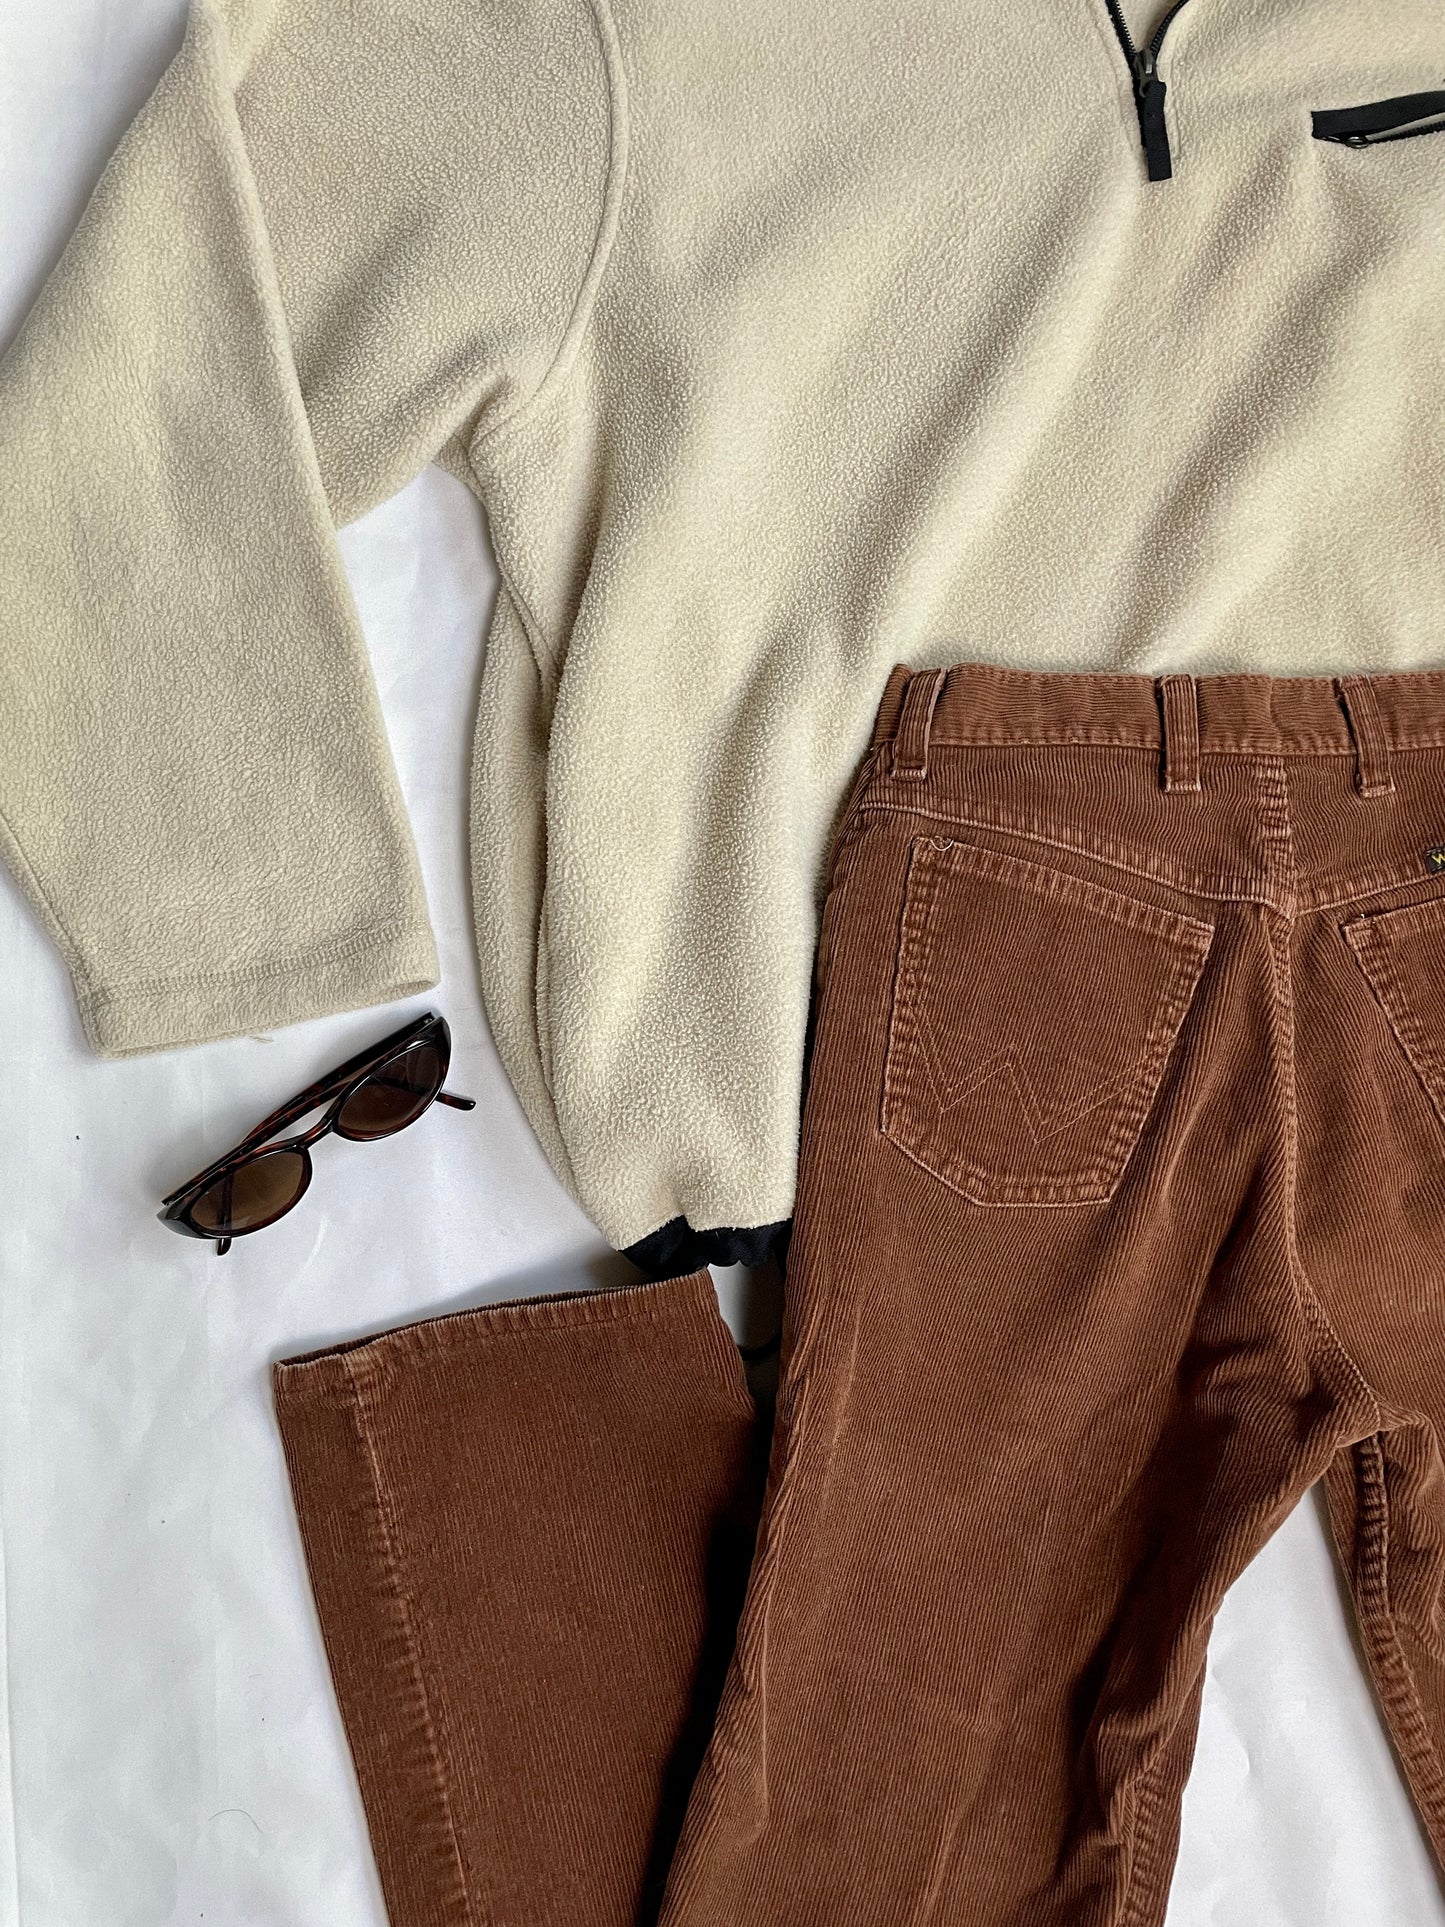 FALL inspired outfit bundle - oversized quarter zip + corduroy pants + sun glasses